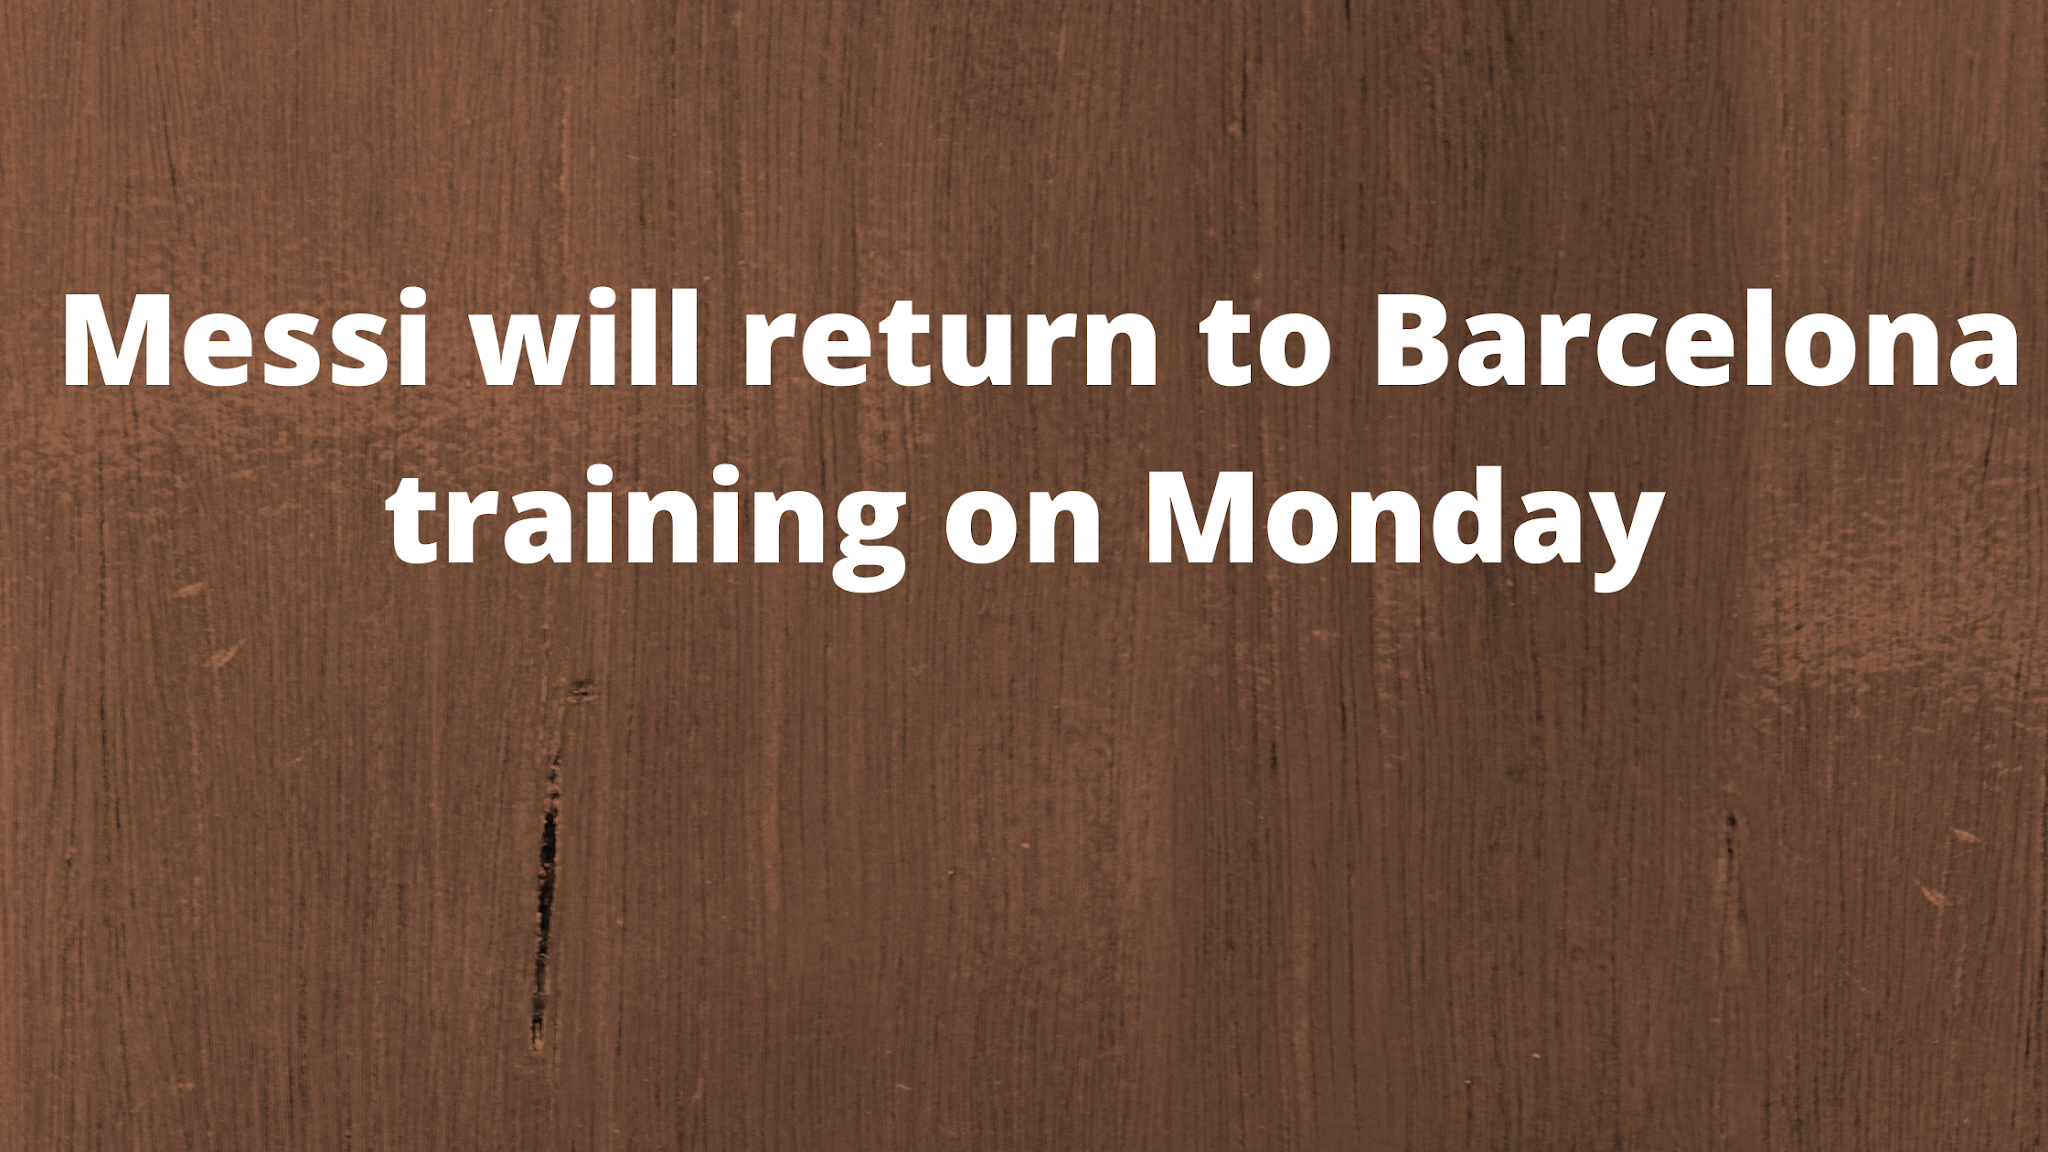 Messi will return to Barcelona training on Monday